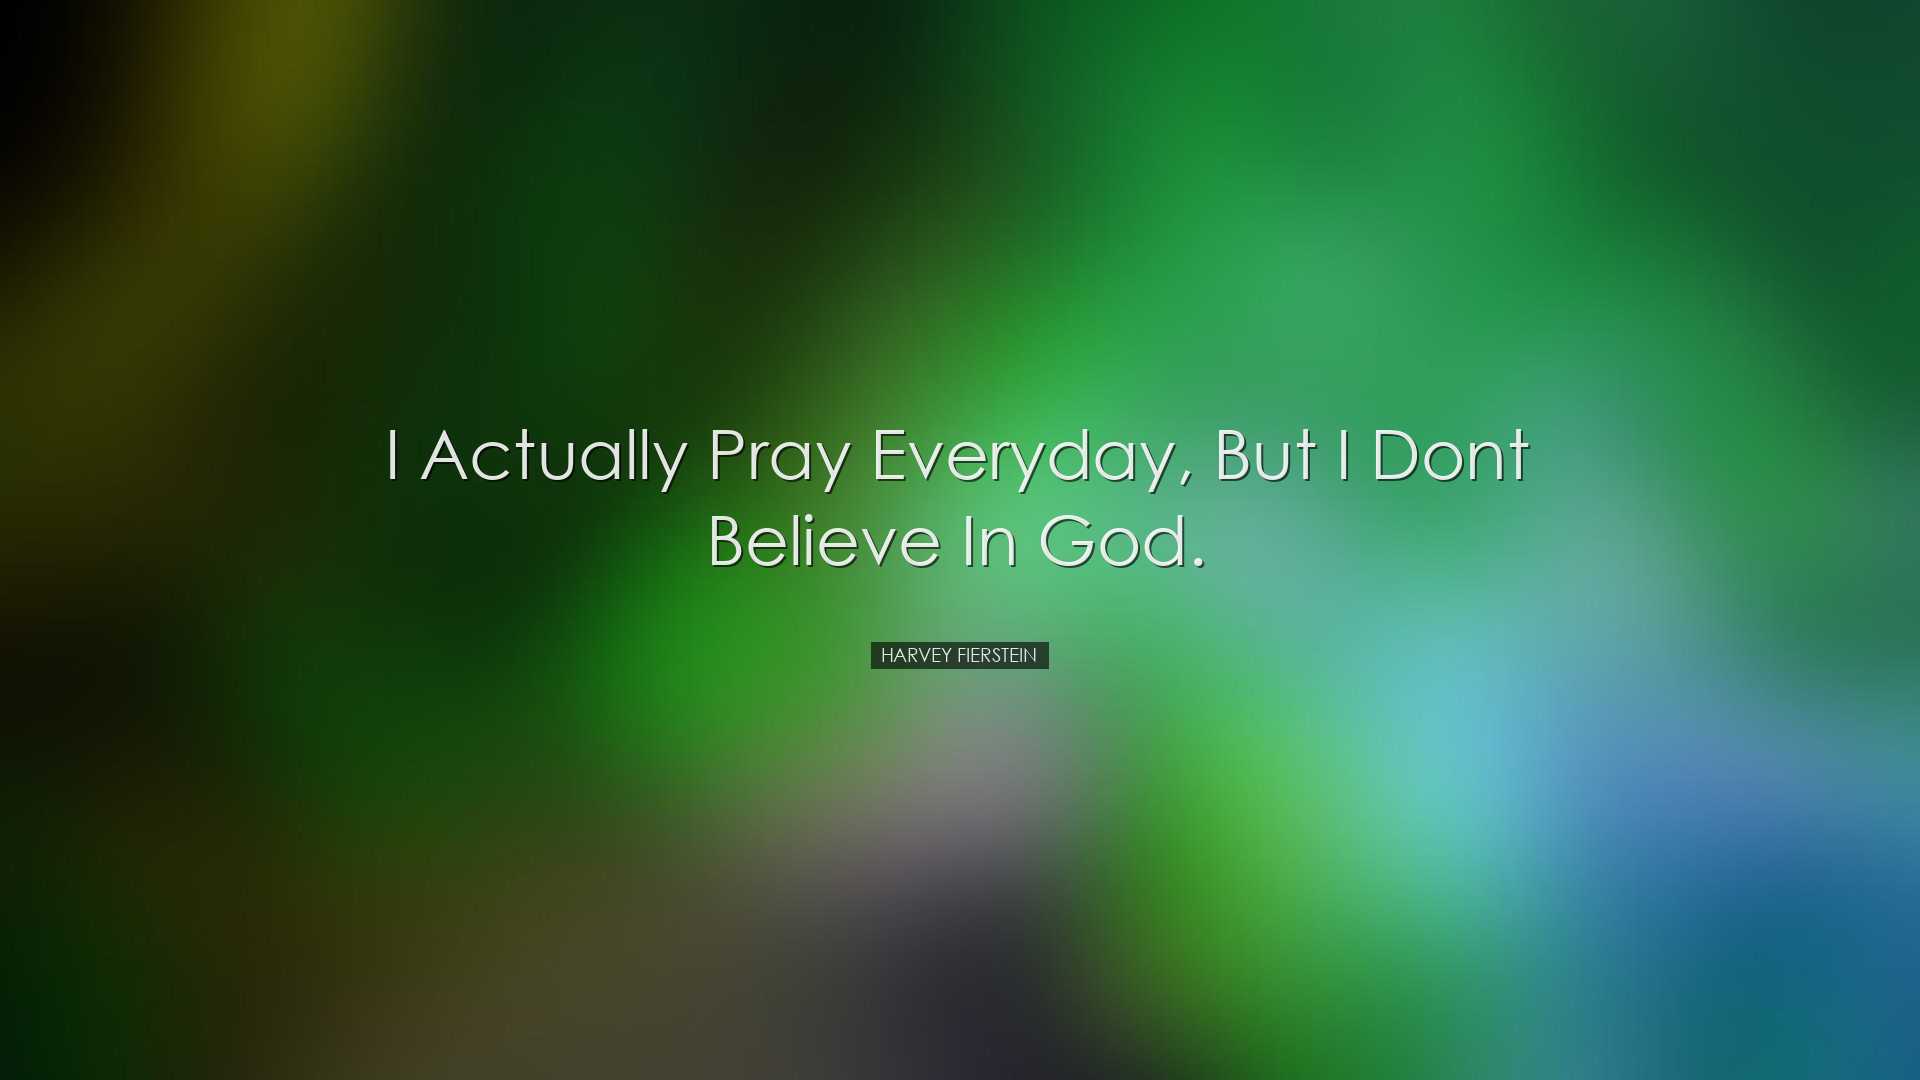 I actually pray everyday, but I dont believe in God. - Harvey Fier